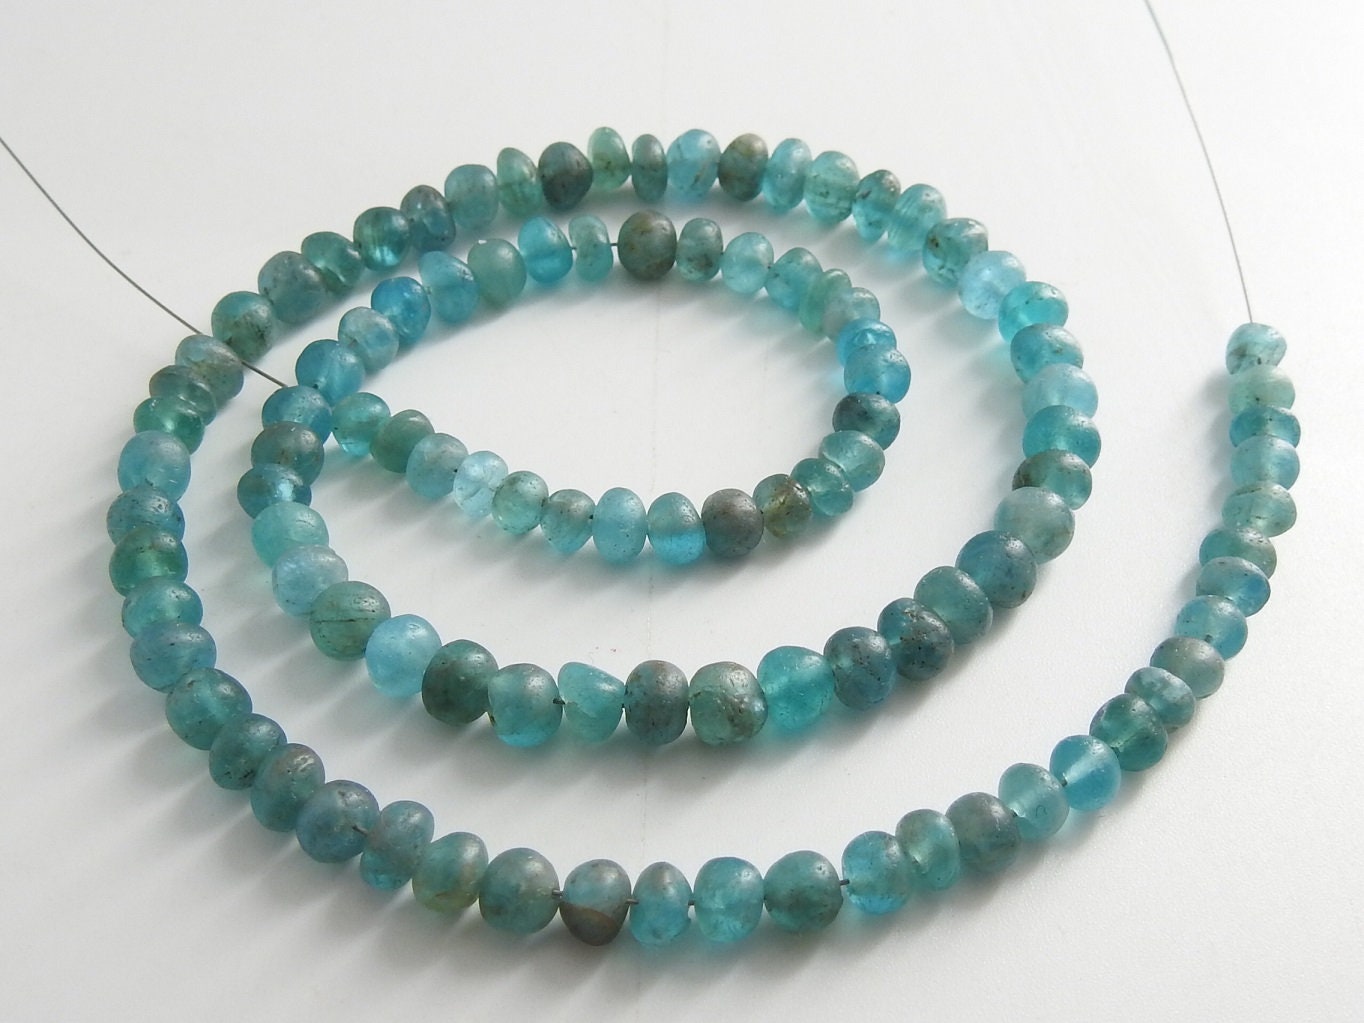 Sky Blue Apatite Roundel Bead,Smooth,Handmade,Matte Polished,Loose Bead,Necklace,For Making Jewelry,Wholesaler,Supplies 100%Natural B2 | Save 33% - Rajasthan Living 16